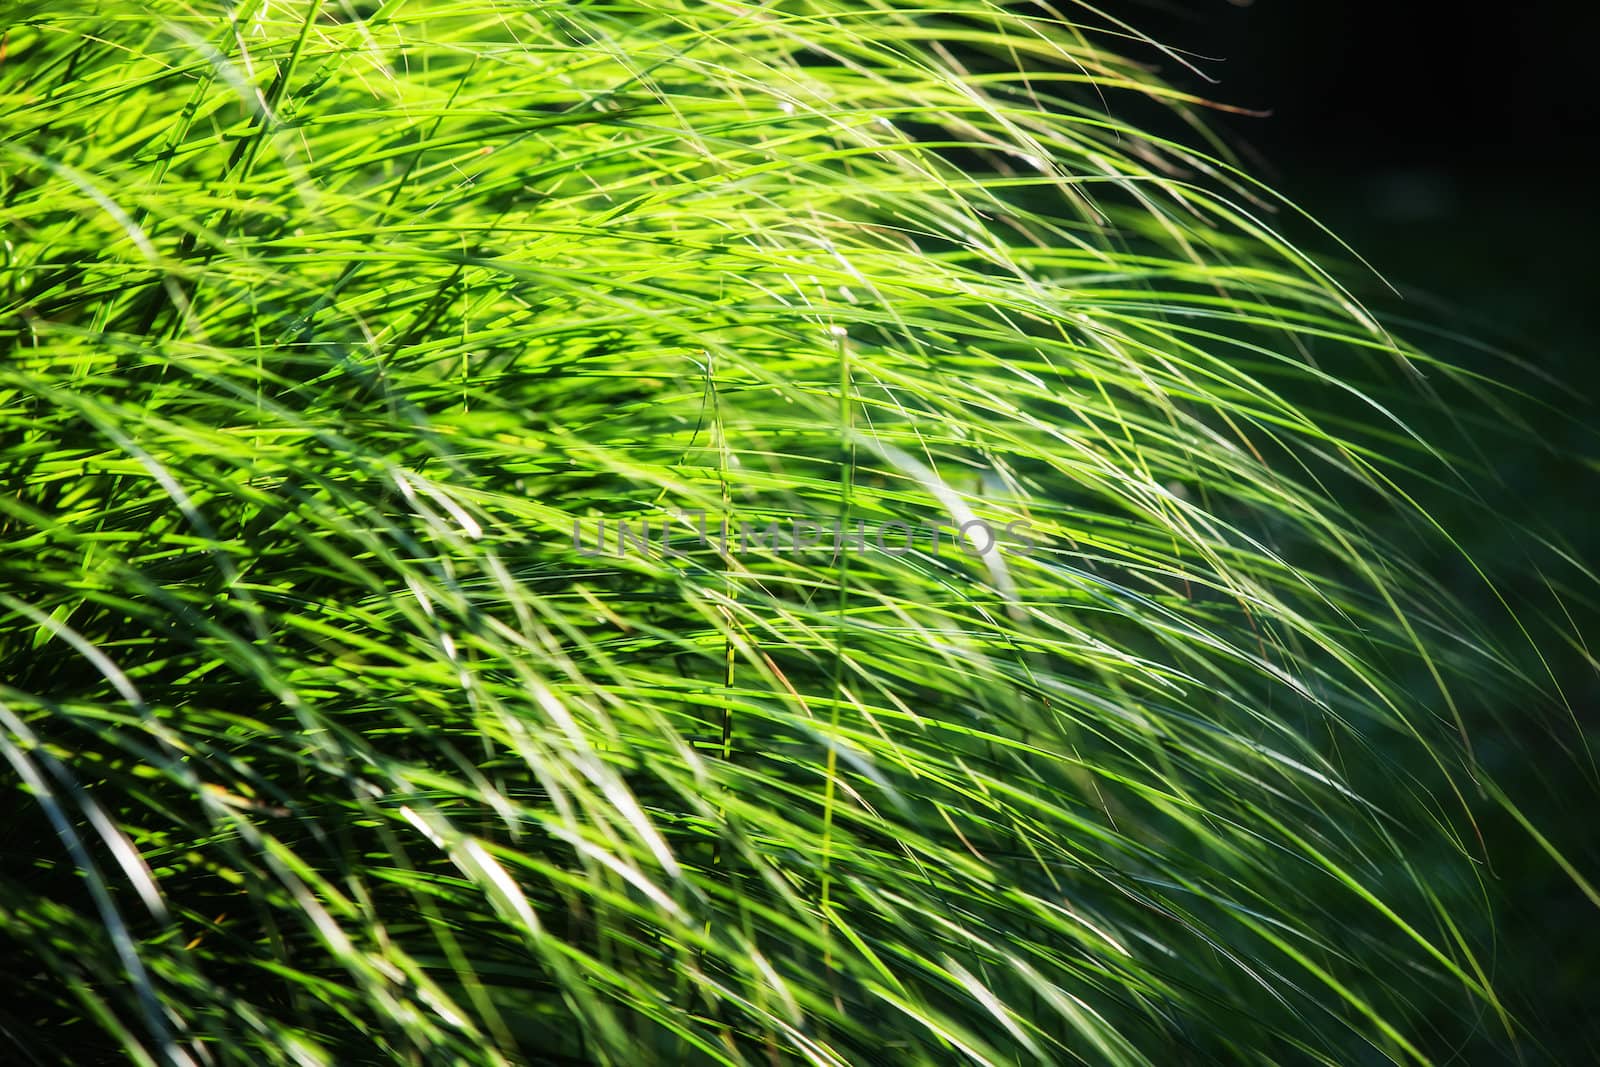 Soft nature background. Long leaves of grass illuminated by sun